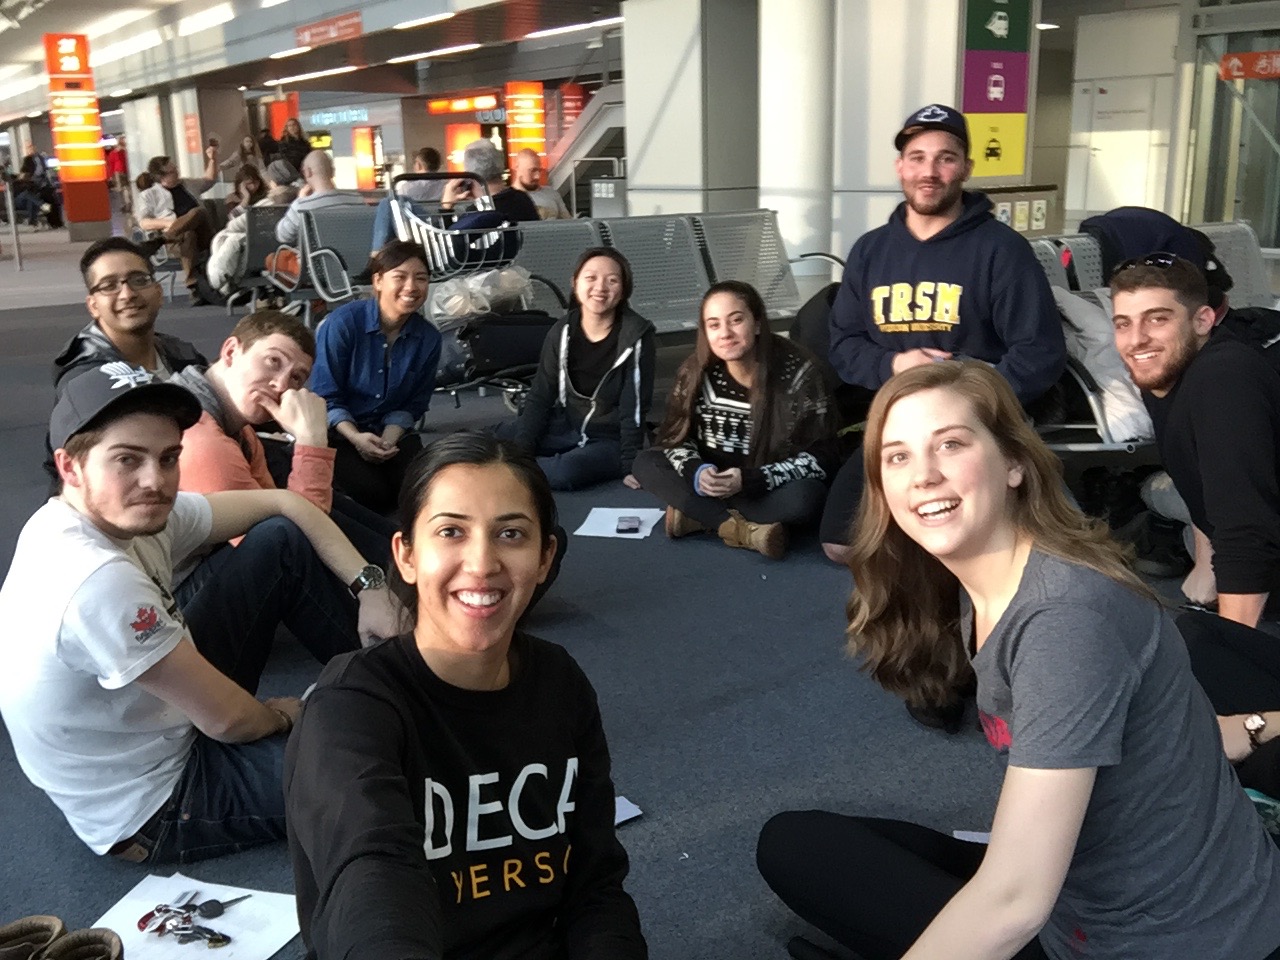 DECA students sitting in a circle at an airport